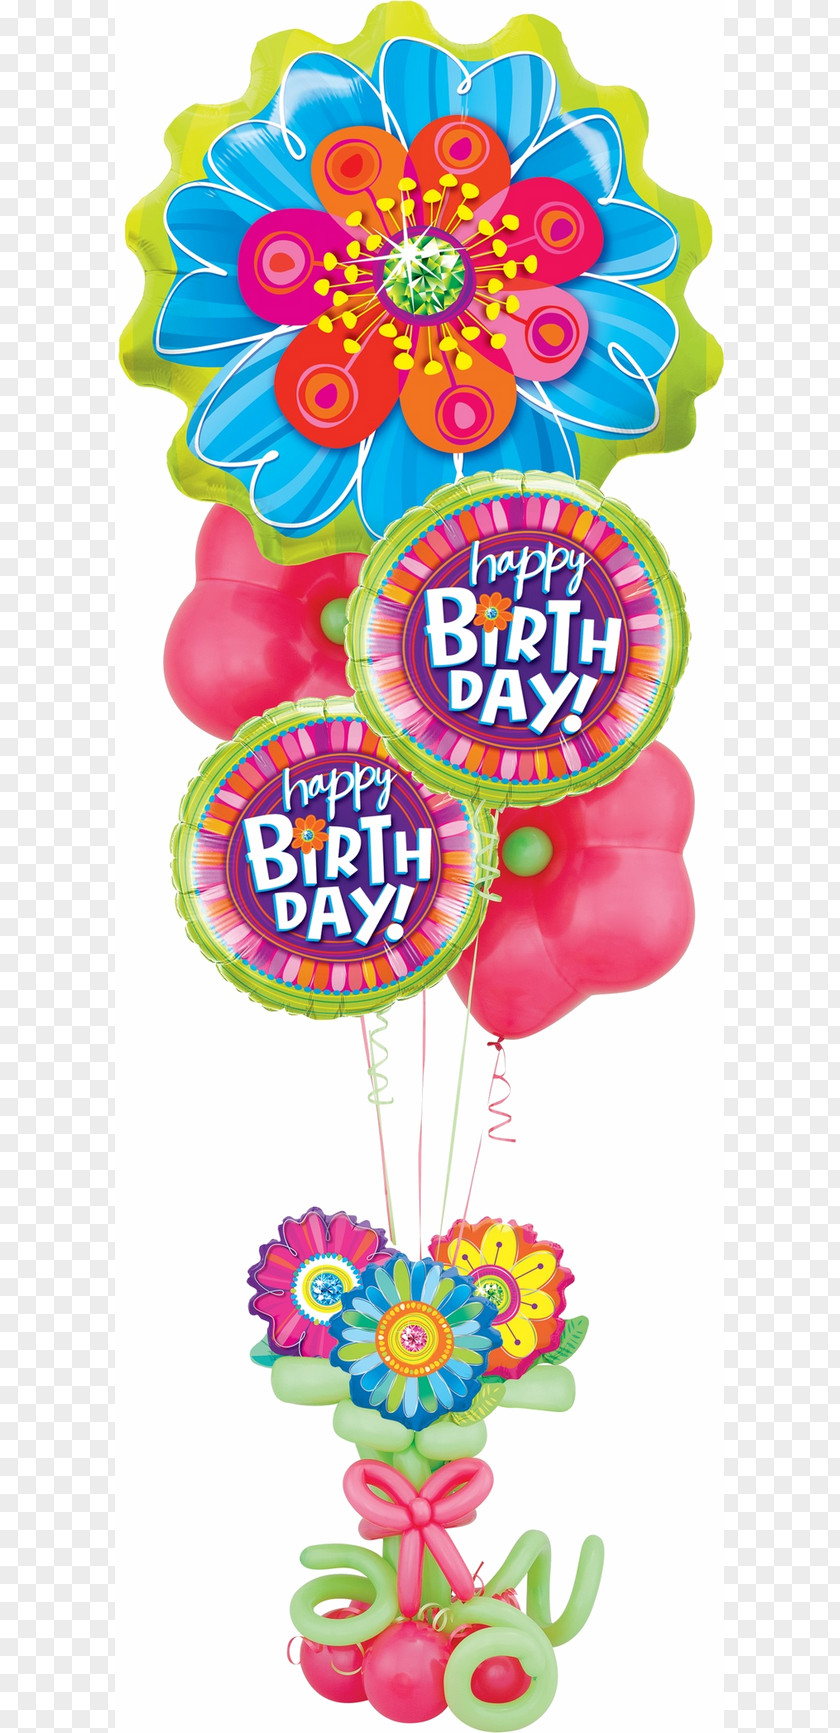 Birthday Elements PNG elements clipart PNG